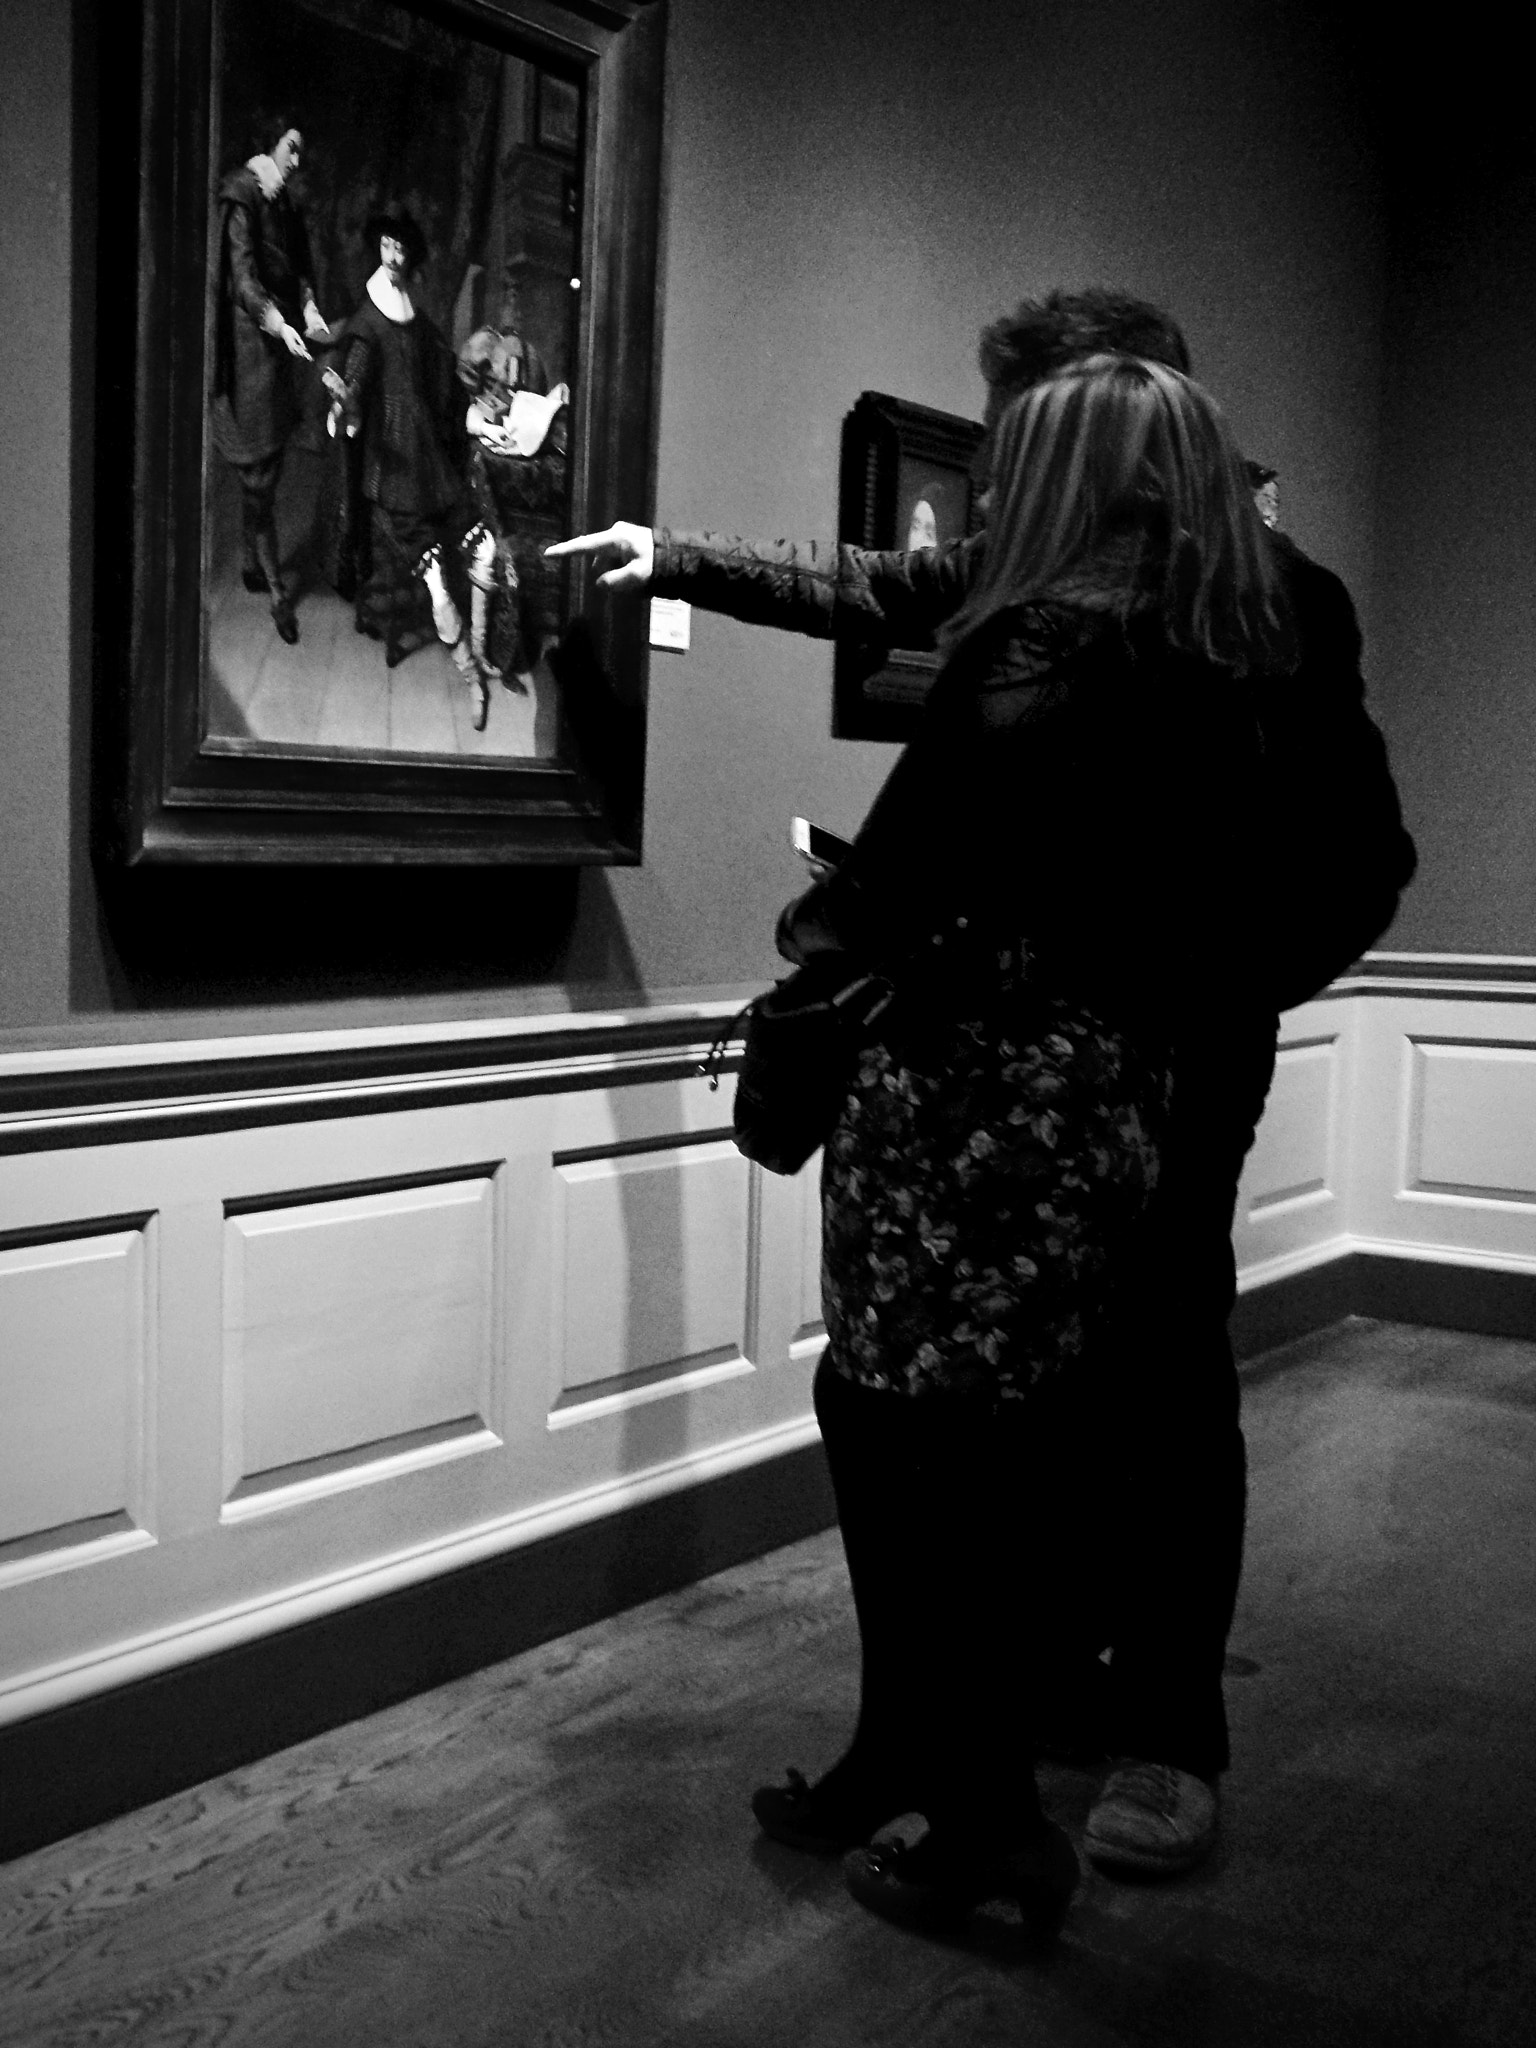 Sony Cyber-shot DSC-RX100 IV sample photo. The national gallery, central london, uk. photography